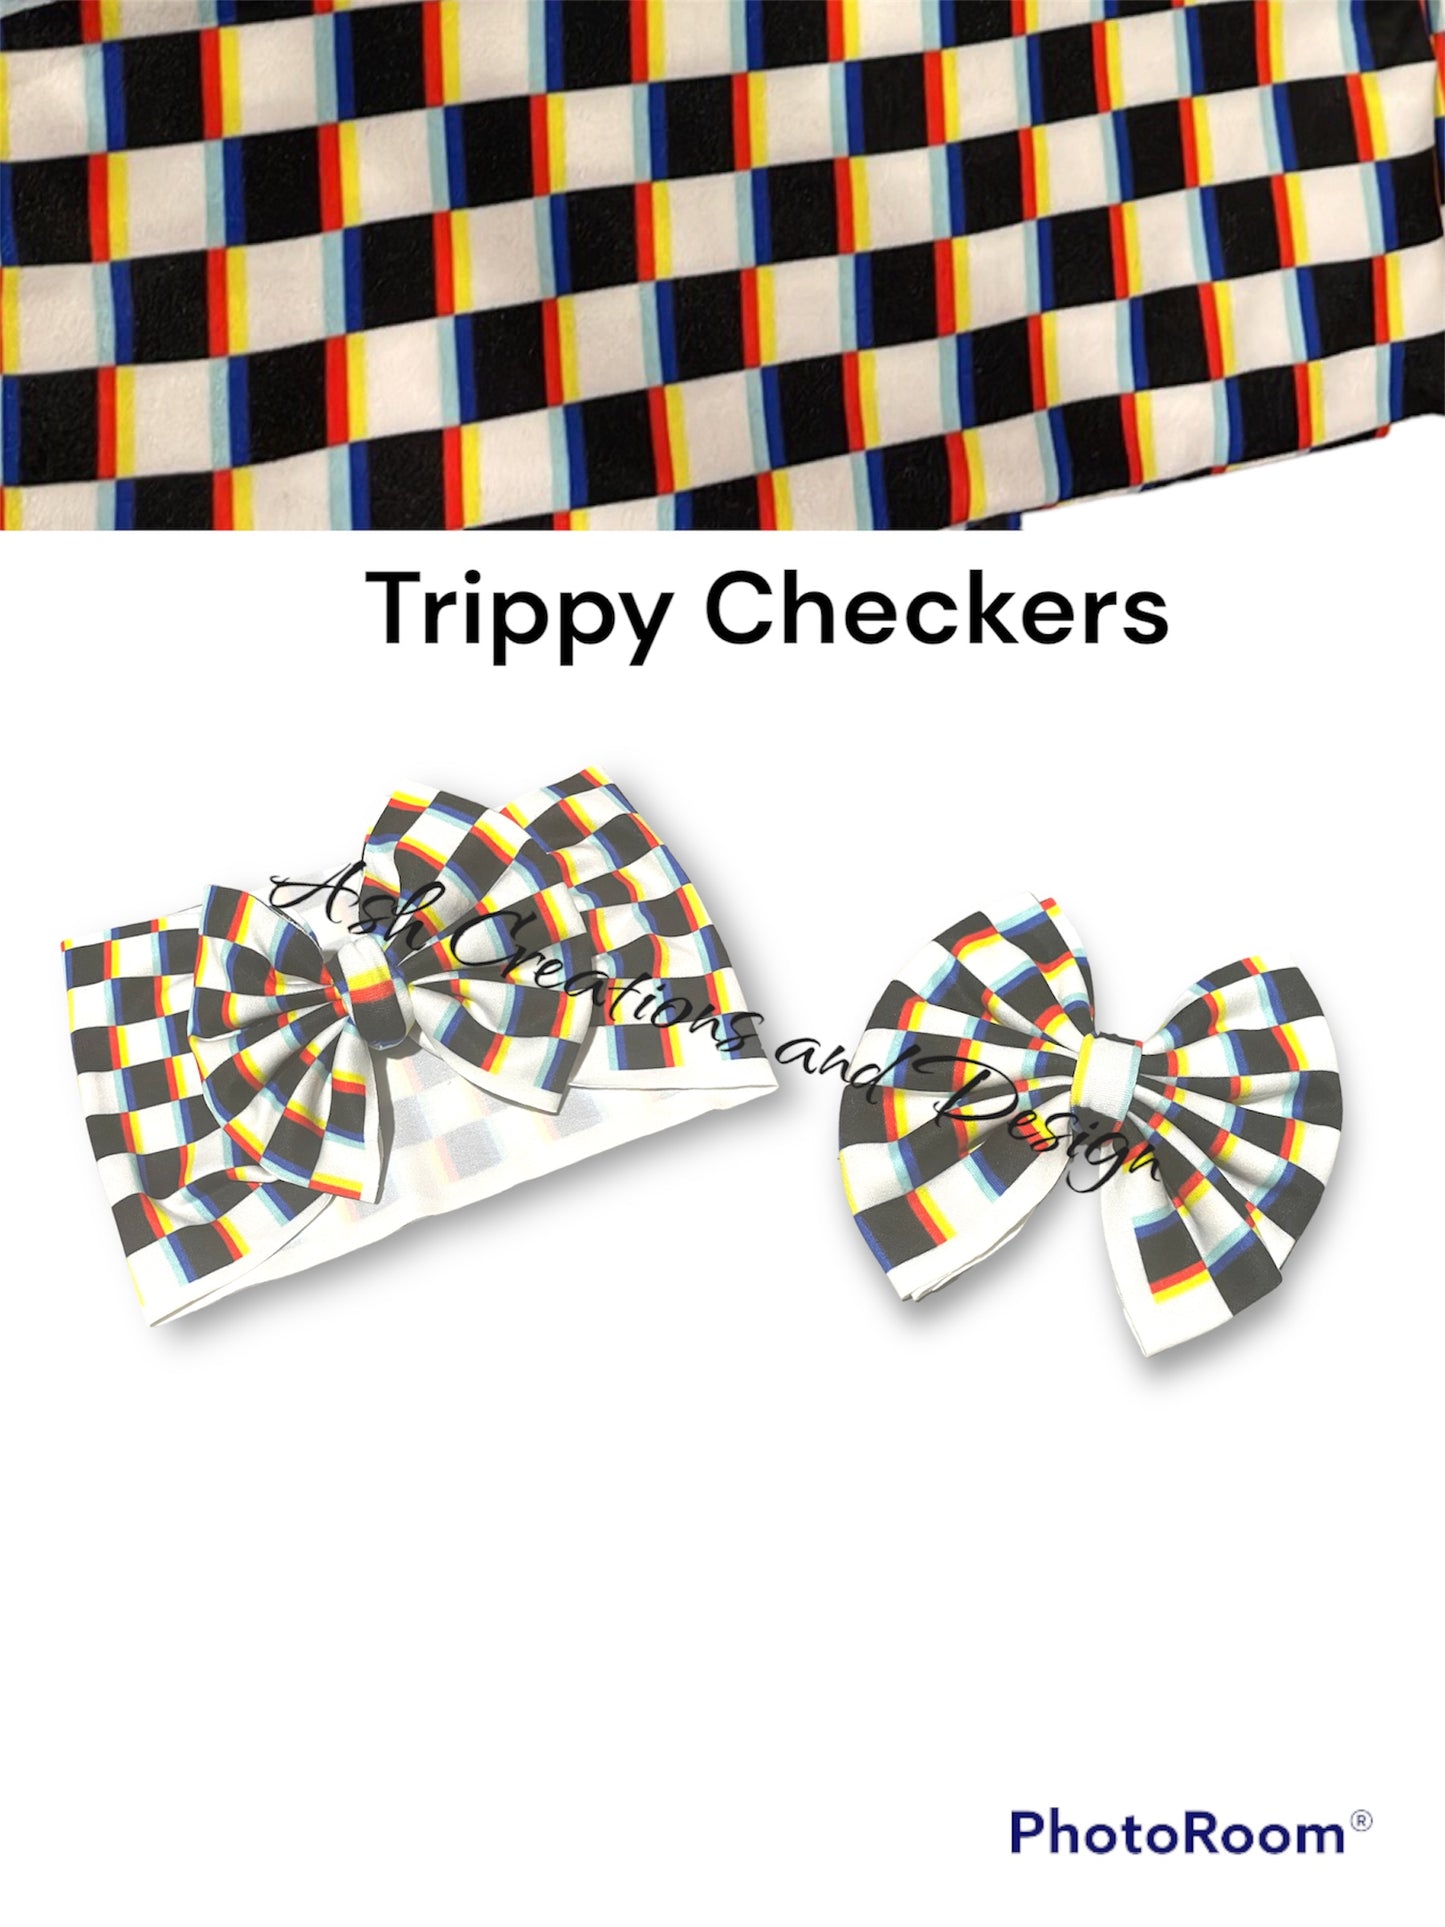 Trippy Checkers